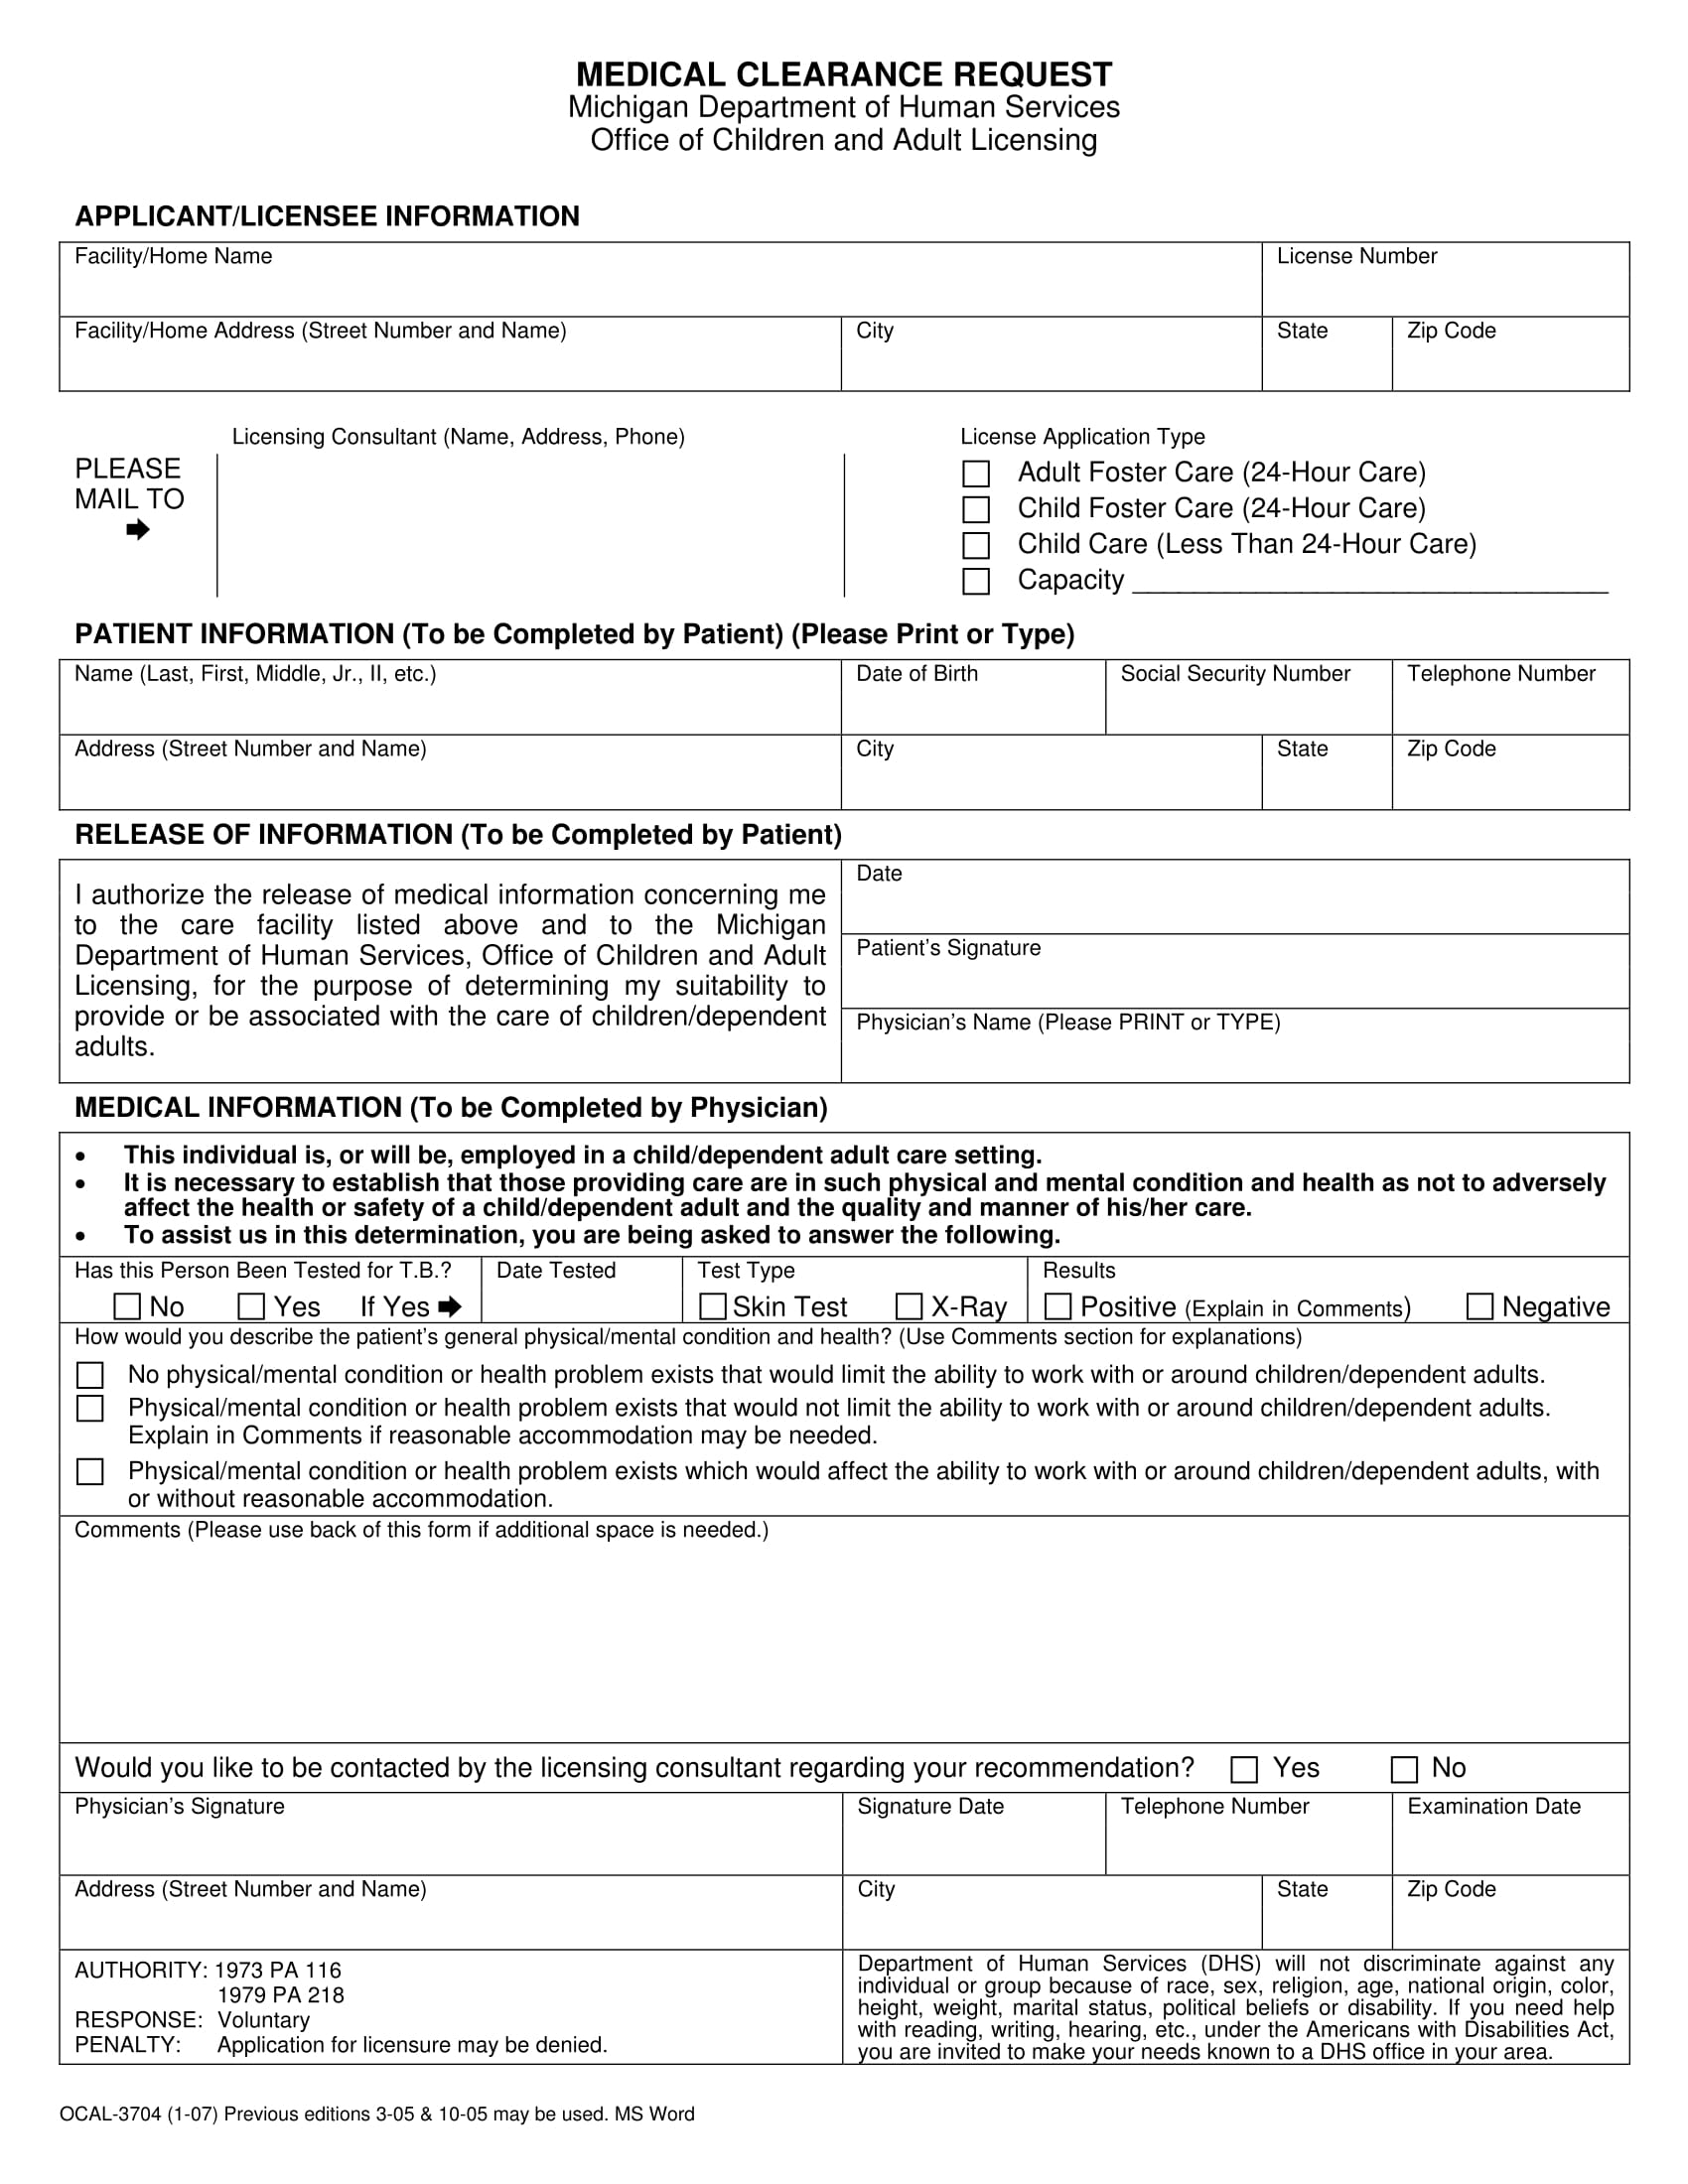 applicant medical clearance form 1